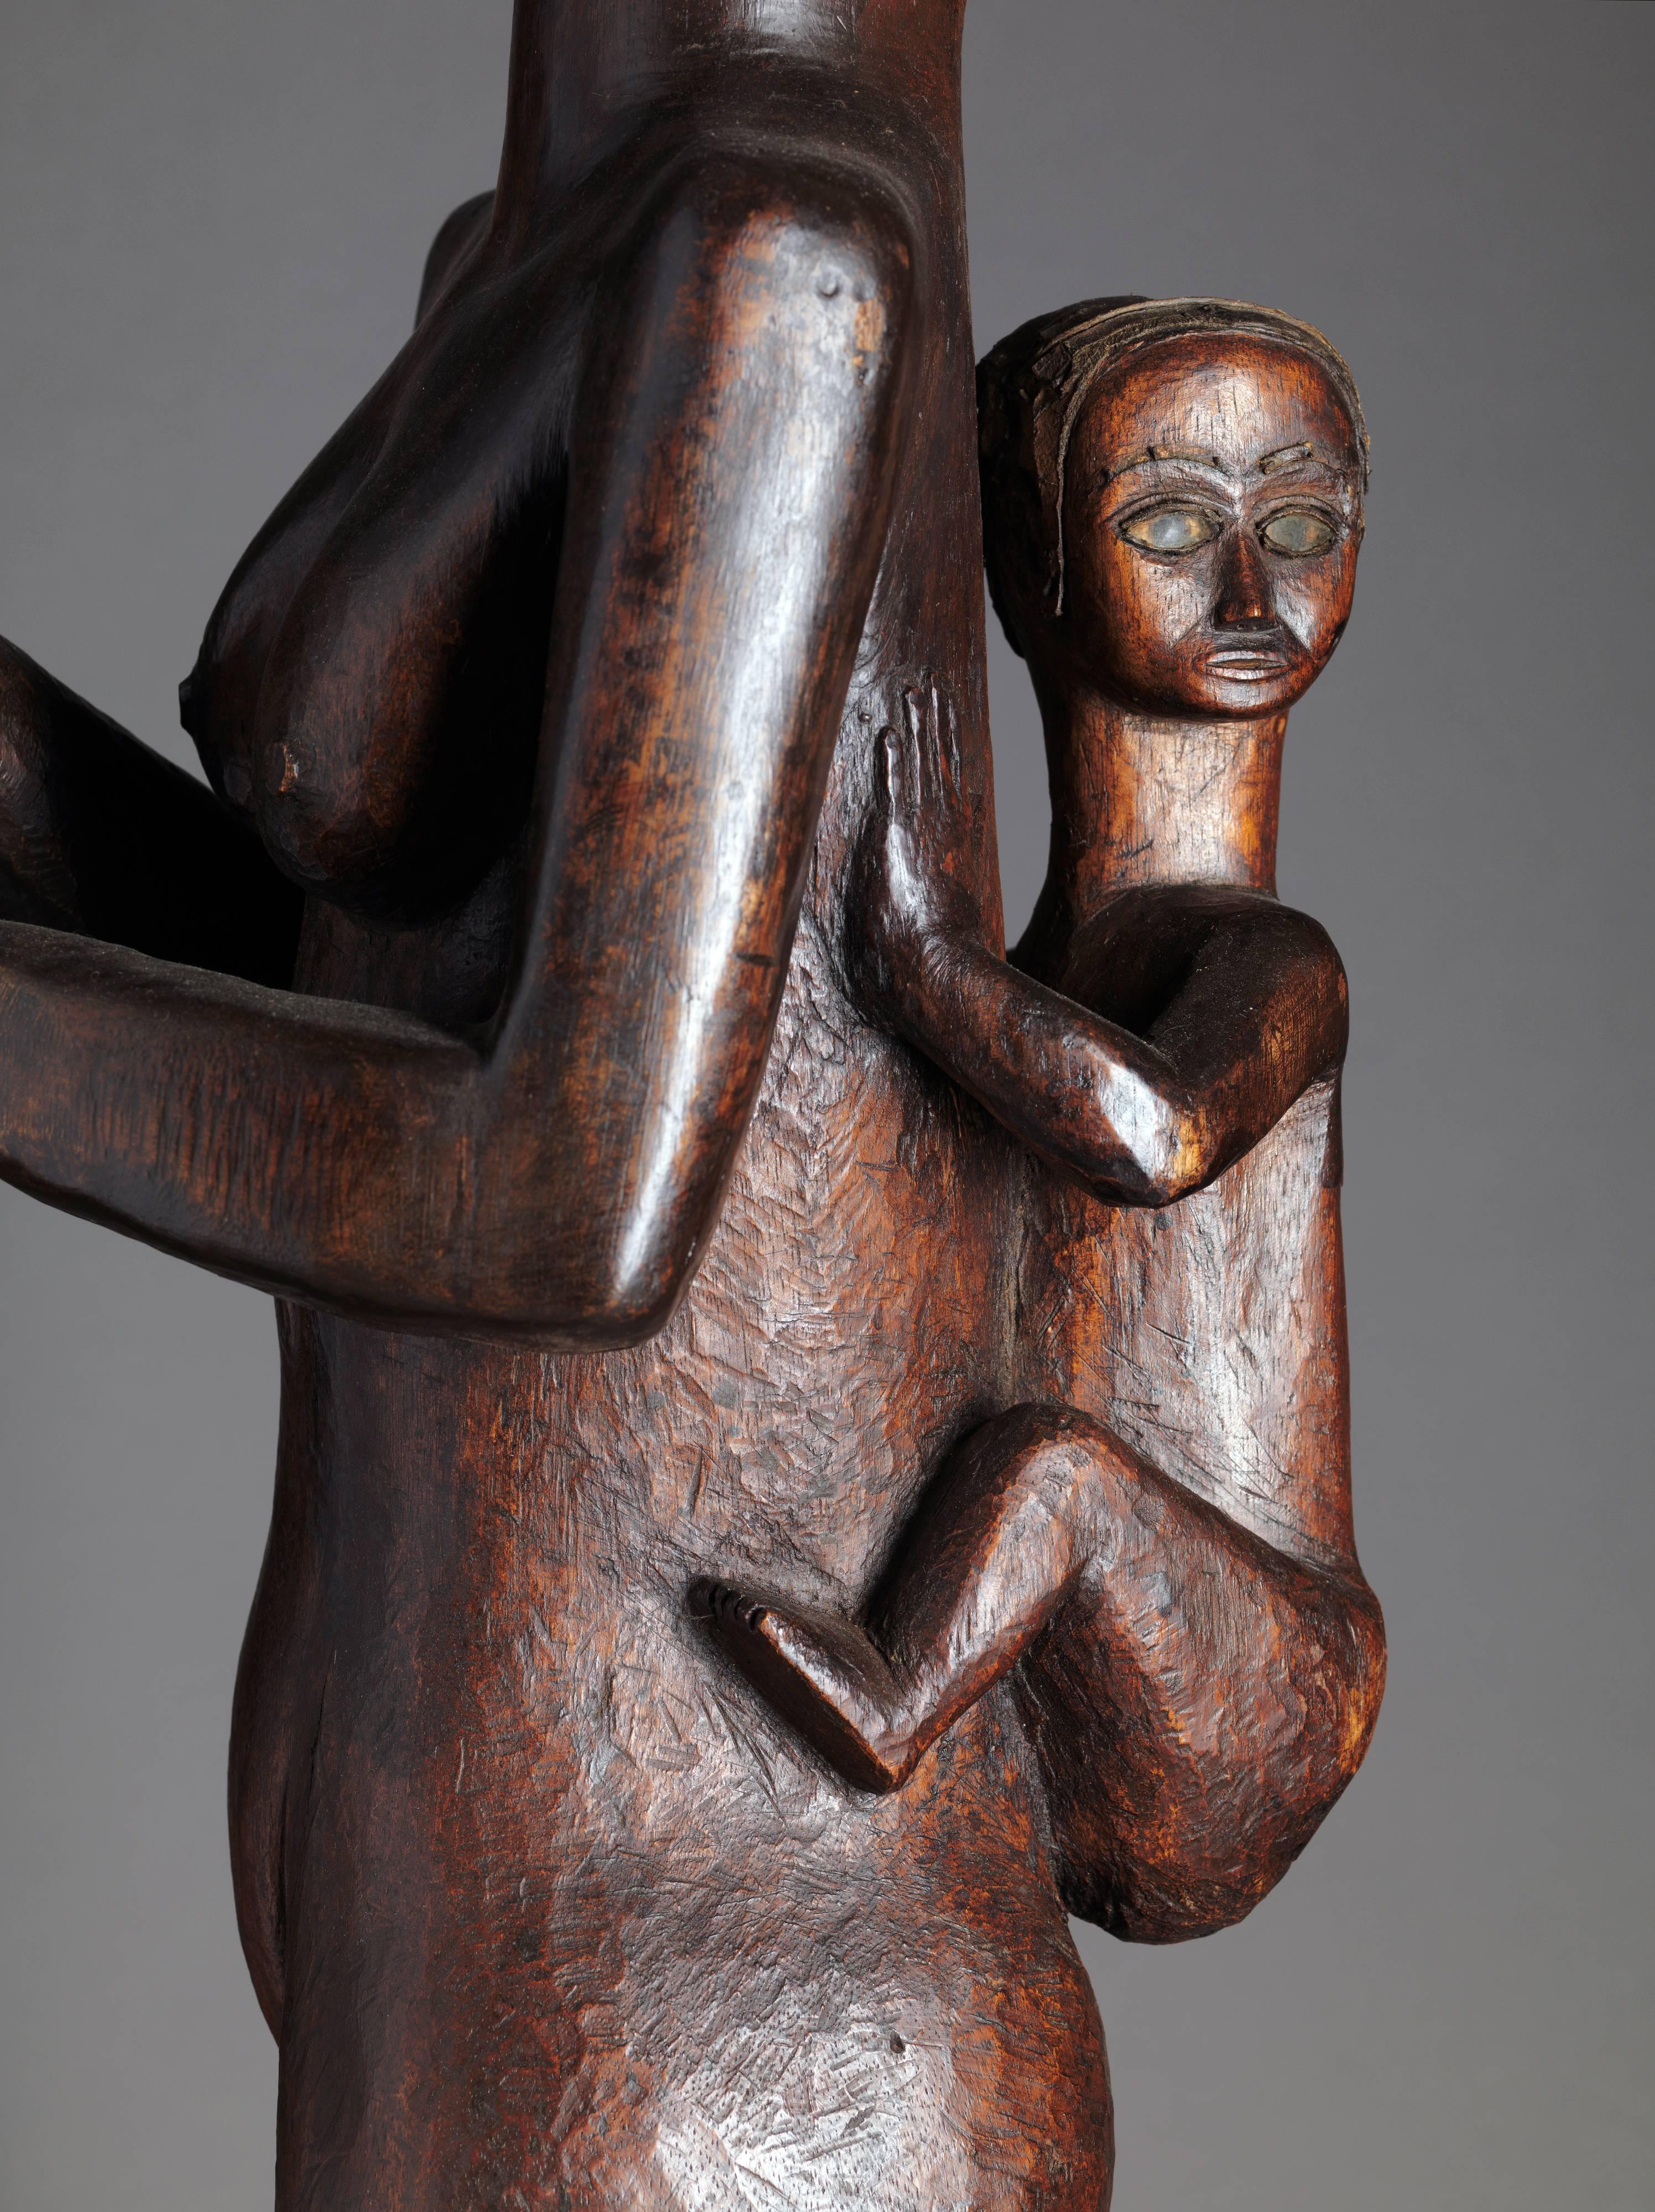 Standing Fang Mabea Maternity of Museum quality, holding a pestle with both her hands. The mother's head is slightly turned to the left, while the child, which she carries on her back, has his head turned to the right. Her left leg indicates a